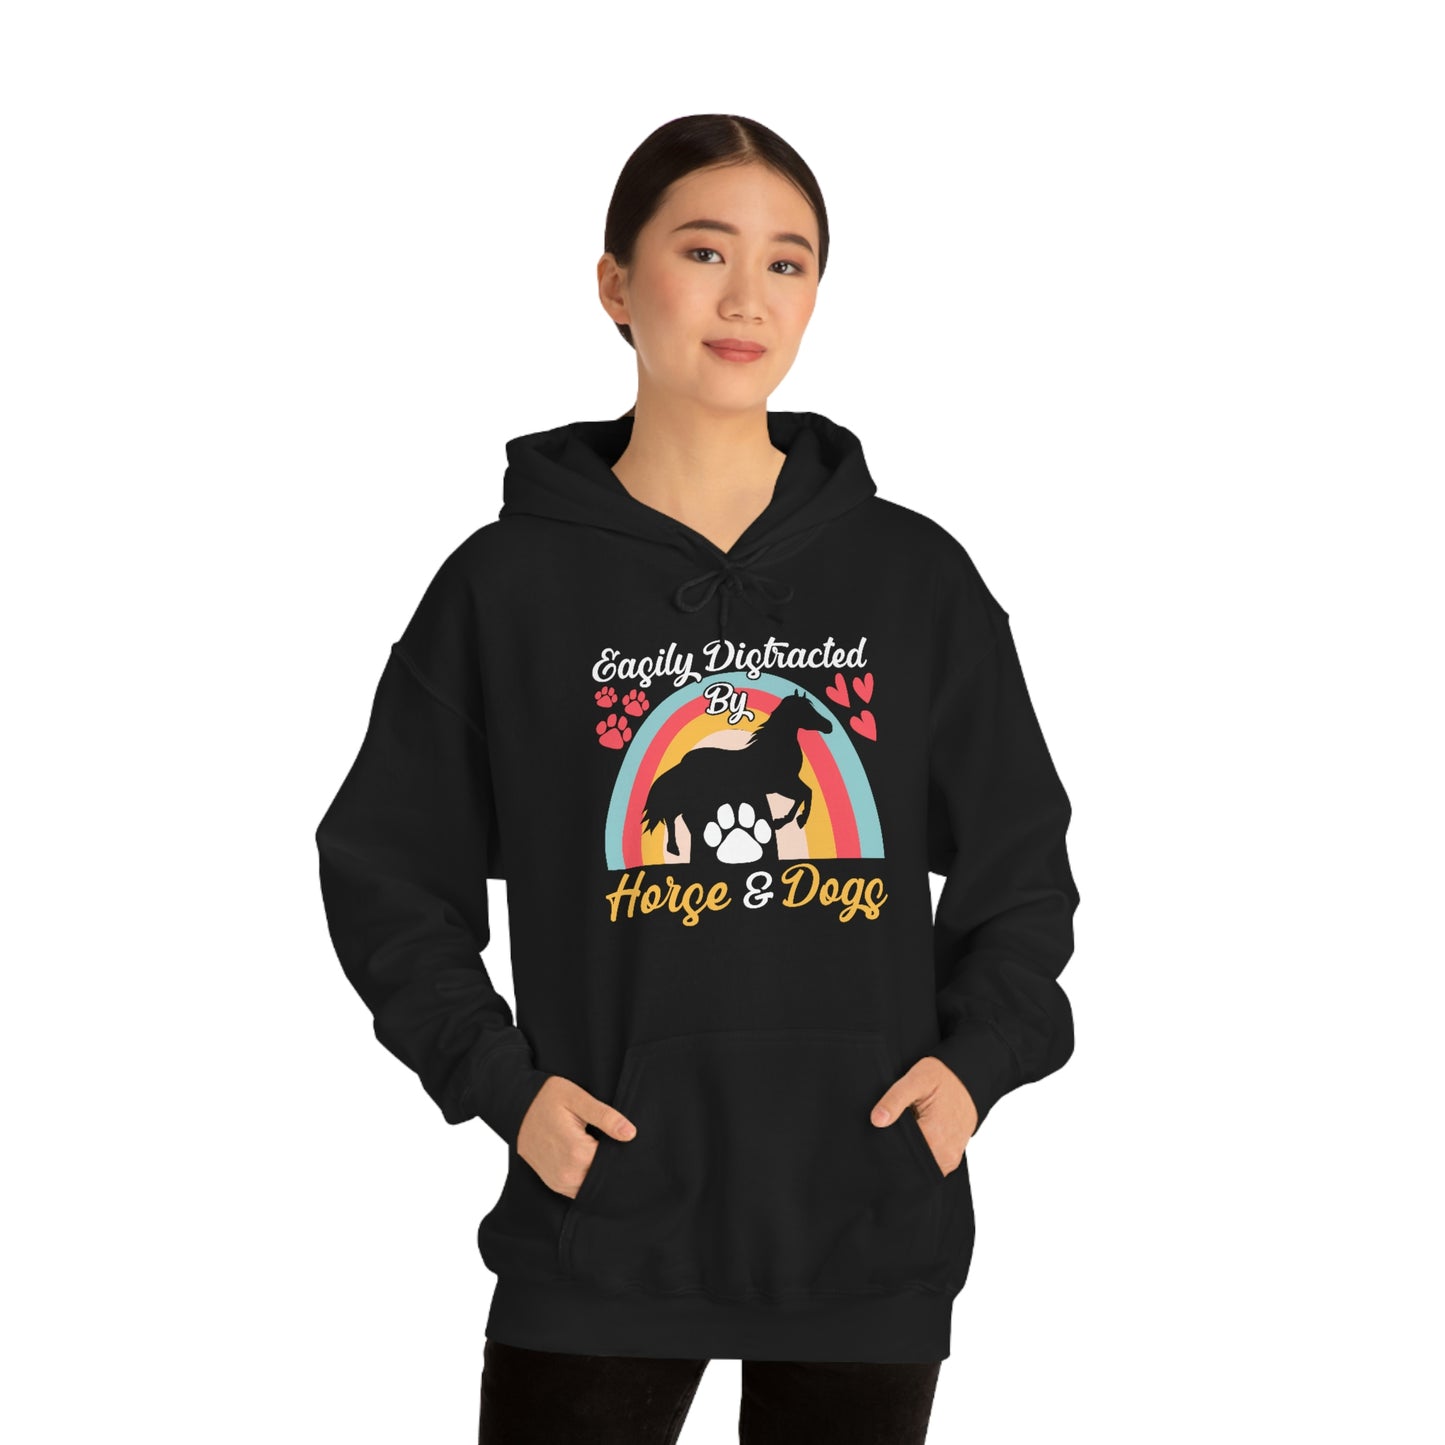 Easily Distracted by Horse & Dogs Heavy Blend™ Hooded Sweatshirt